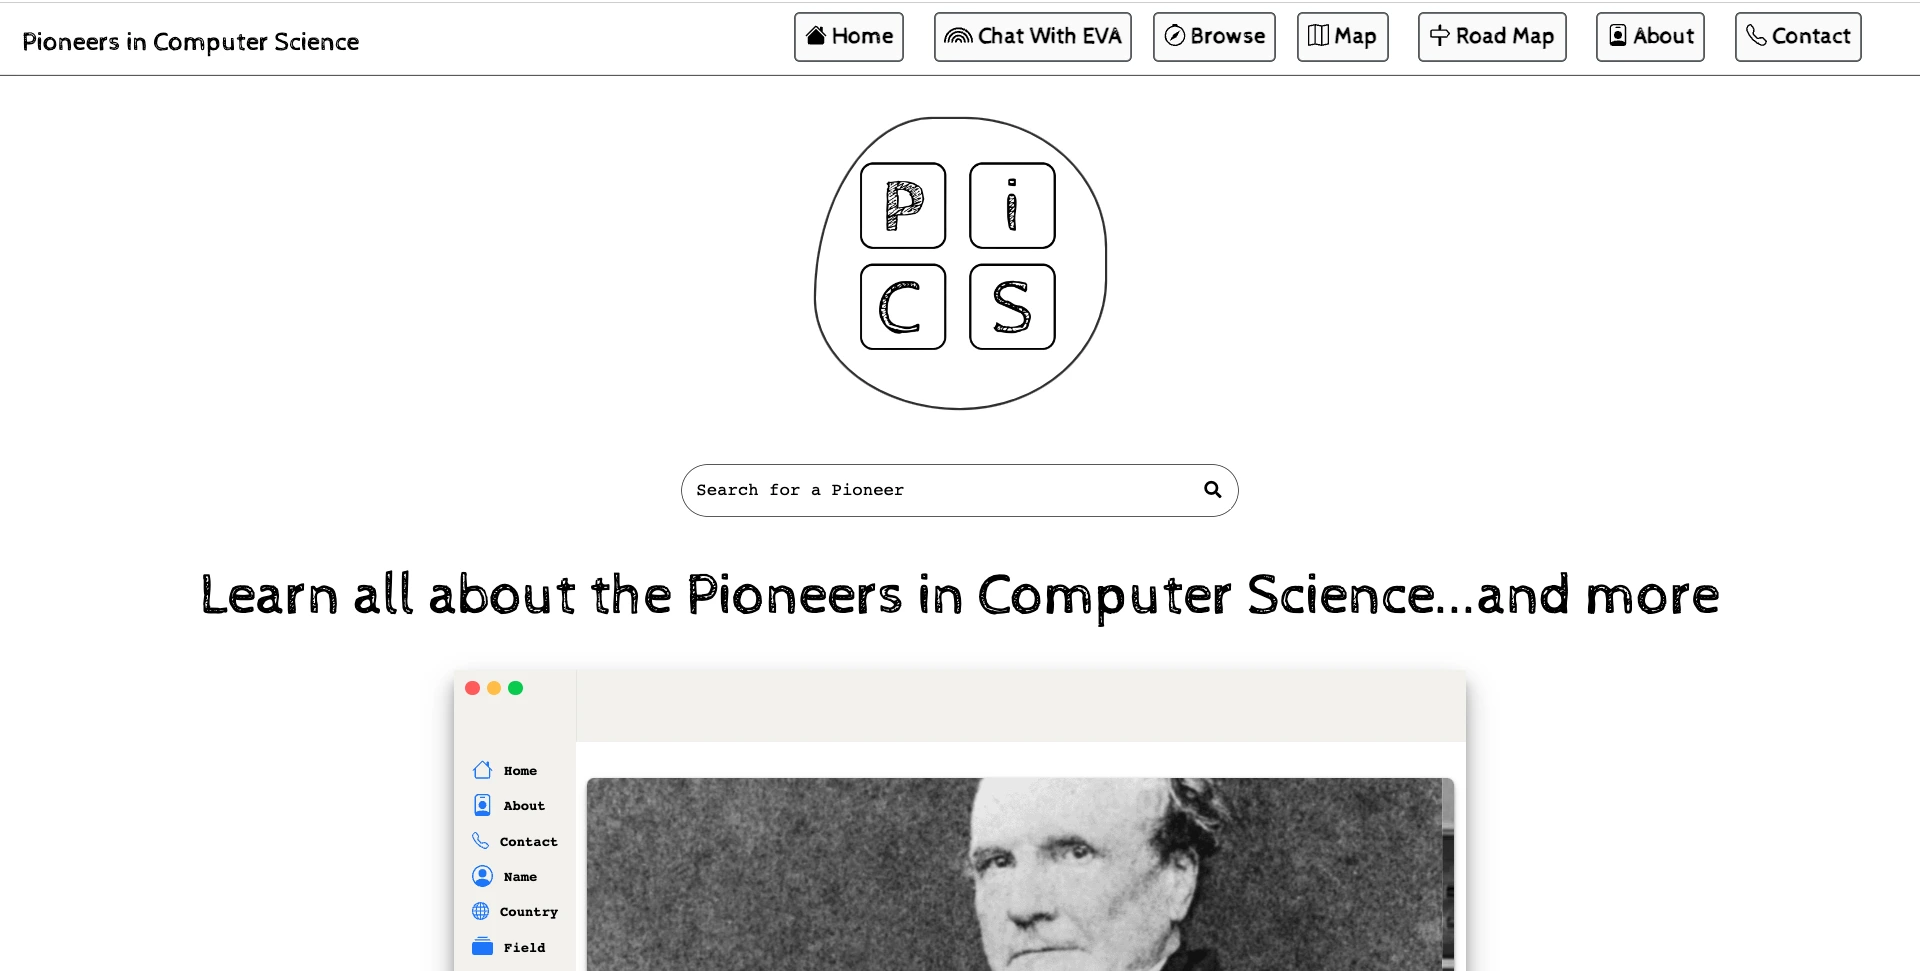 Pioneers in Computer Science - Dissertation Project